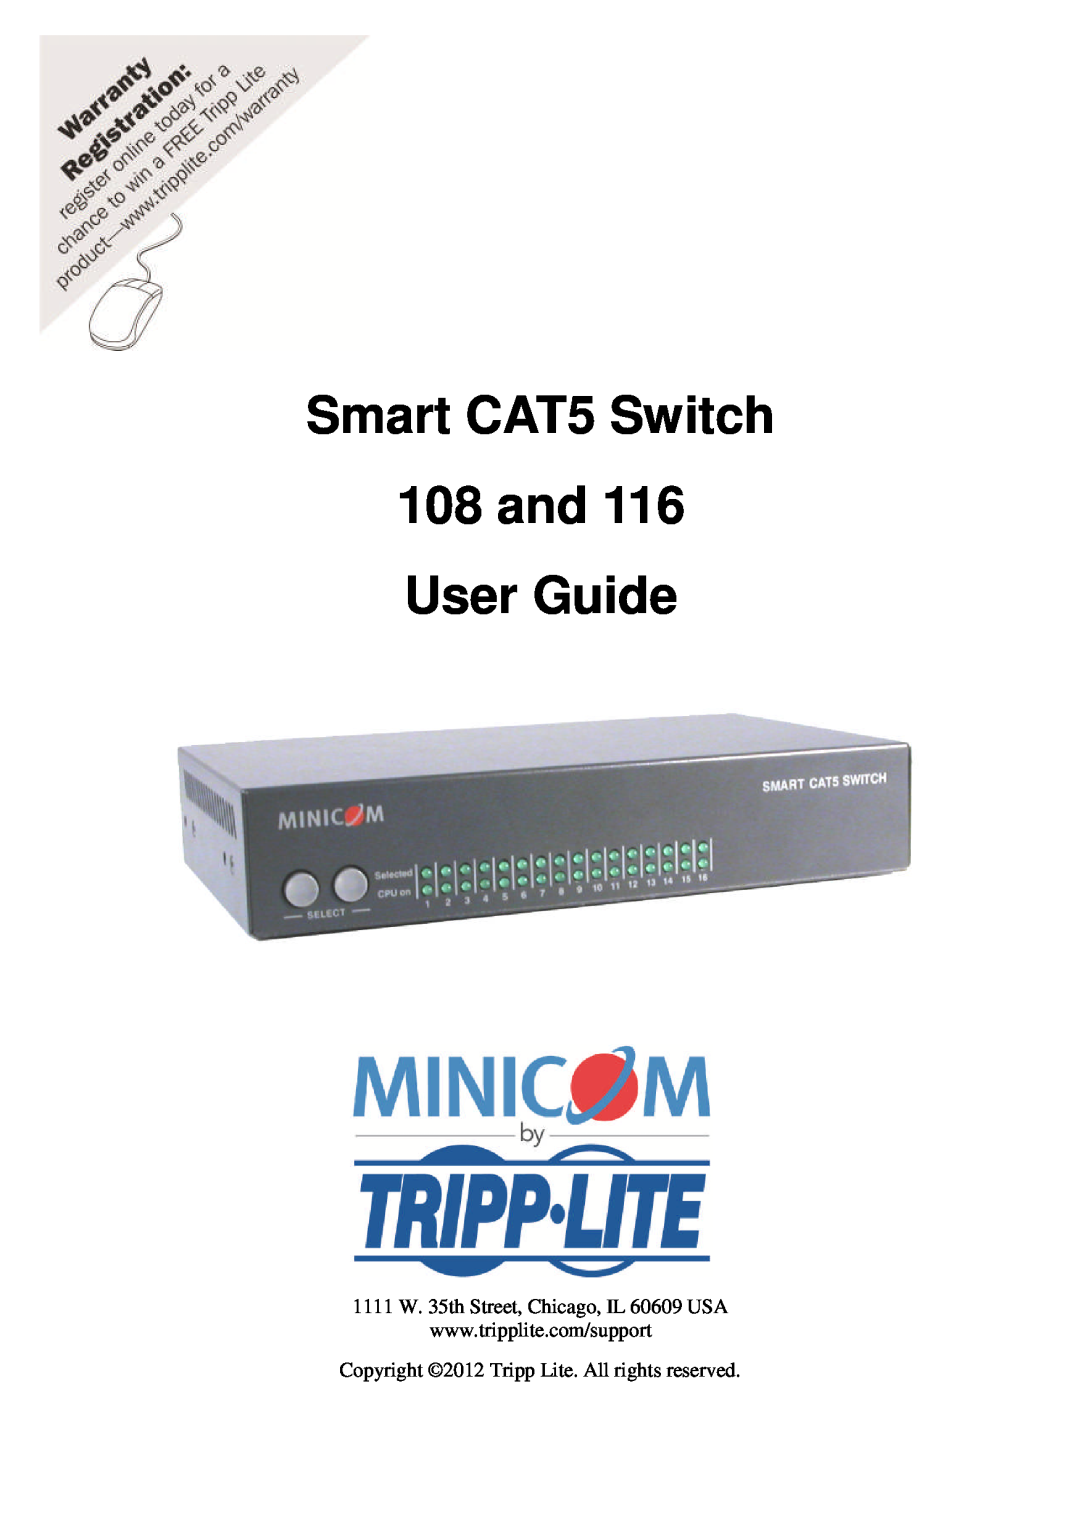 Tripp Lite 116 manual Smart CAT5 Switch 108 and User Guide, 1111 W. 35th Street, Chicago, IL 60609 USA 